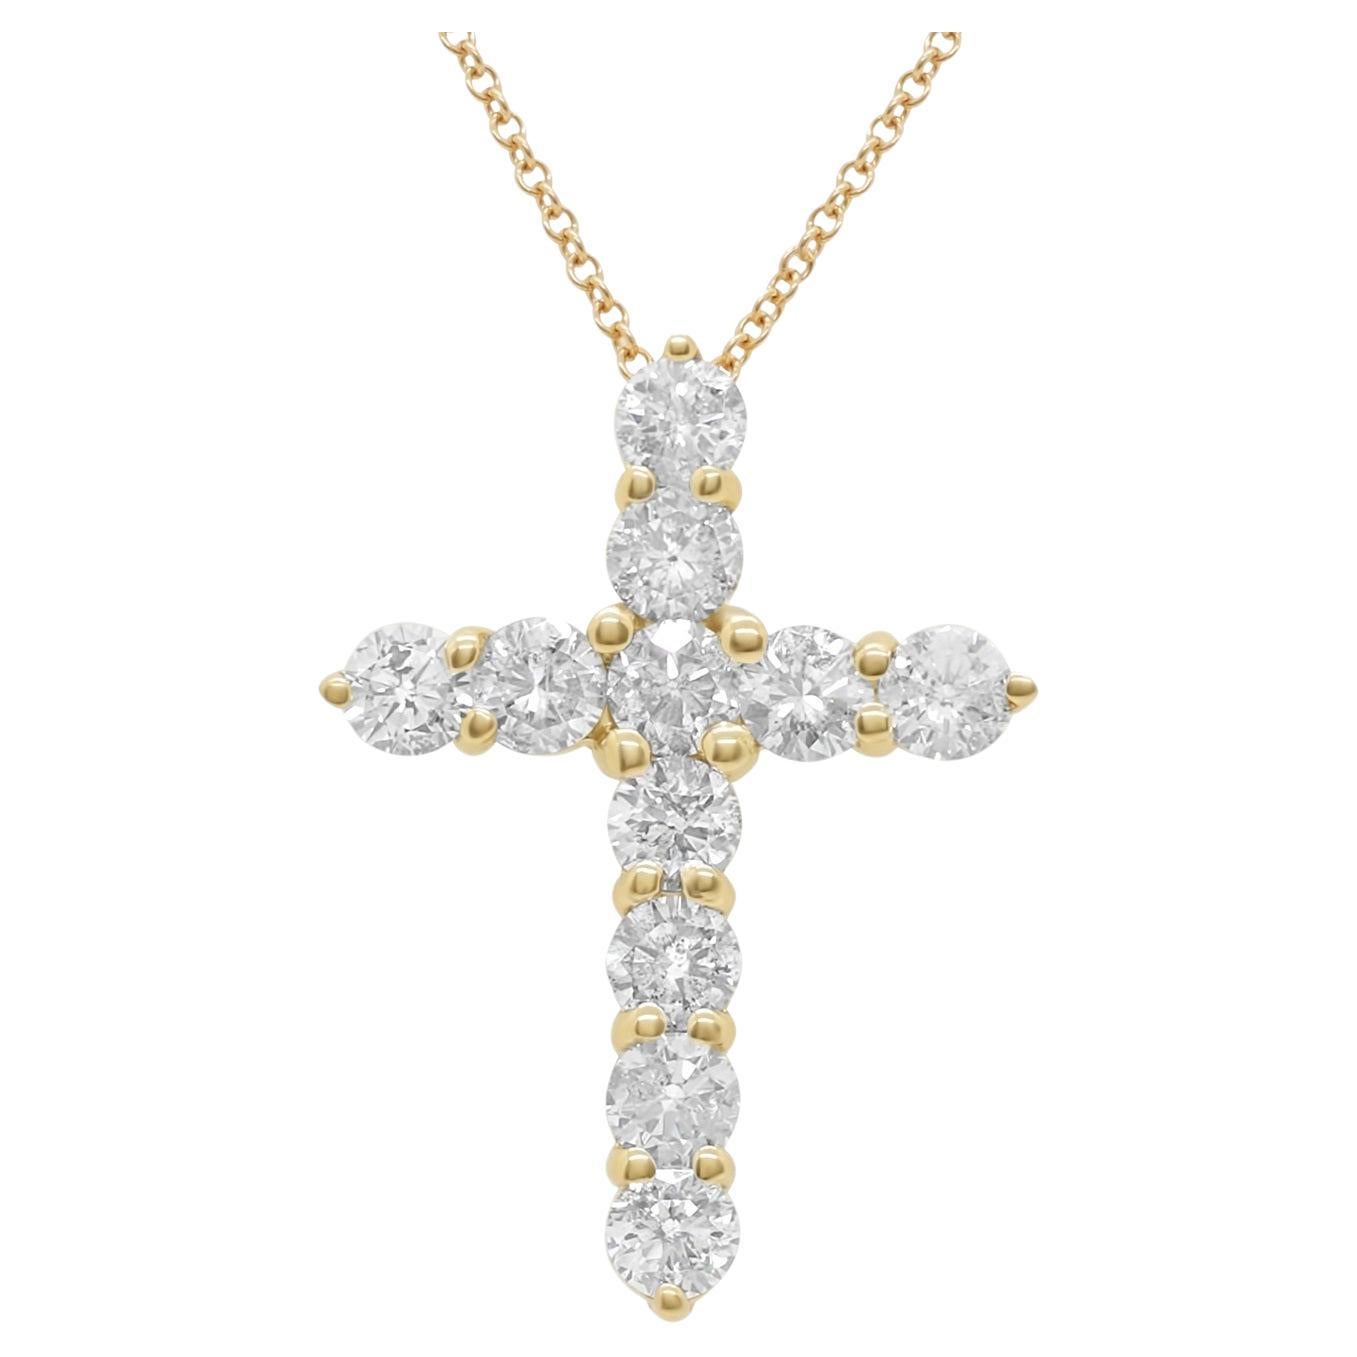 Diana M. 18 kt yellow gold, 1" diamond cross pendant adorned with 3.55 cts tw of